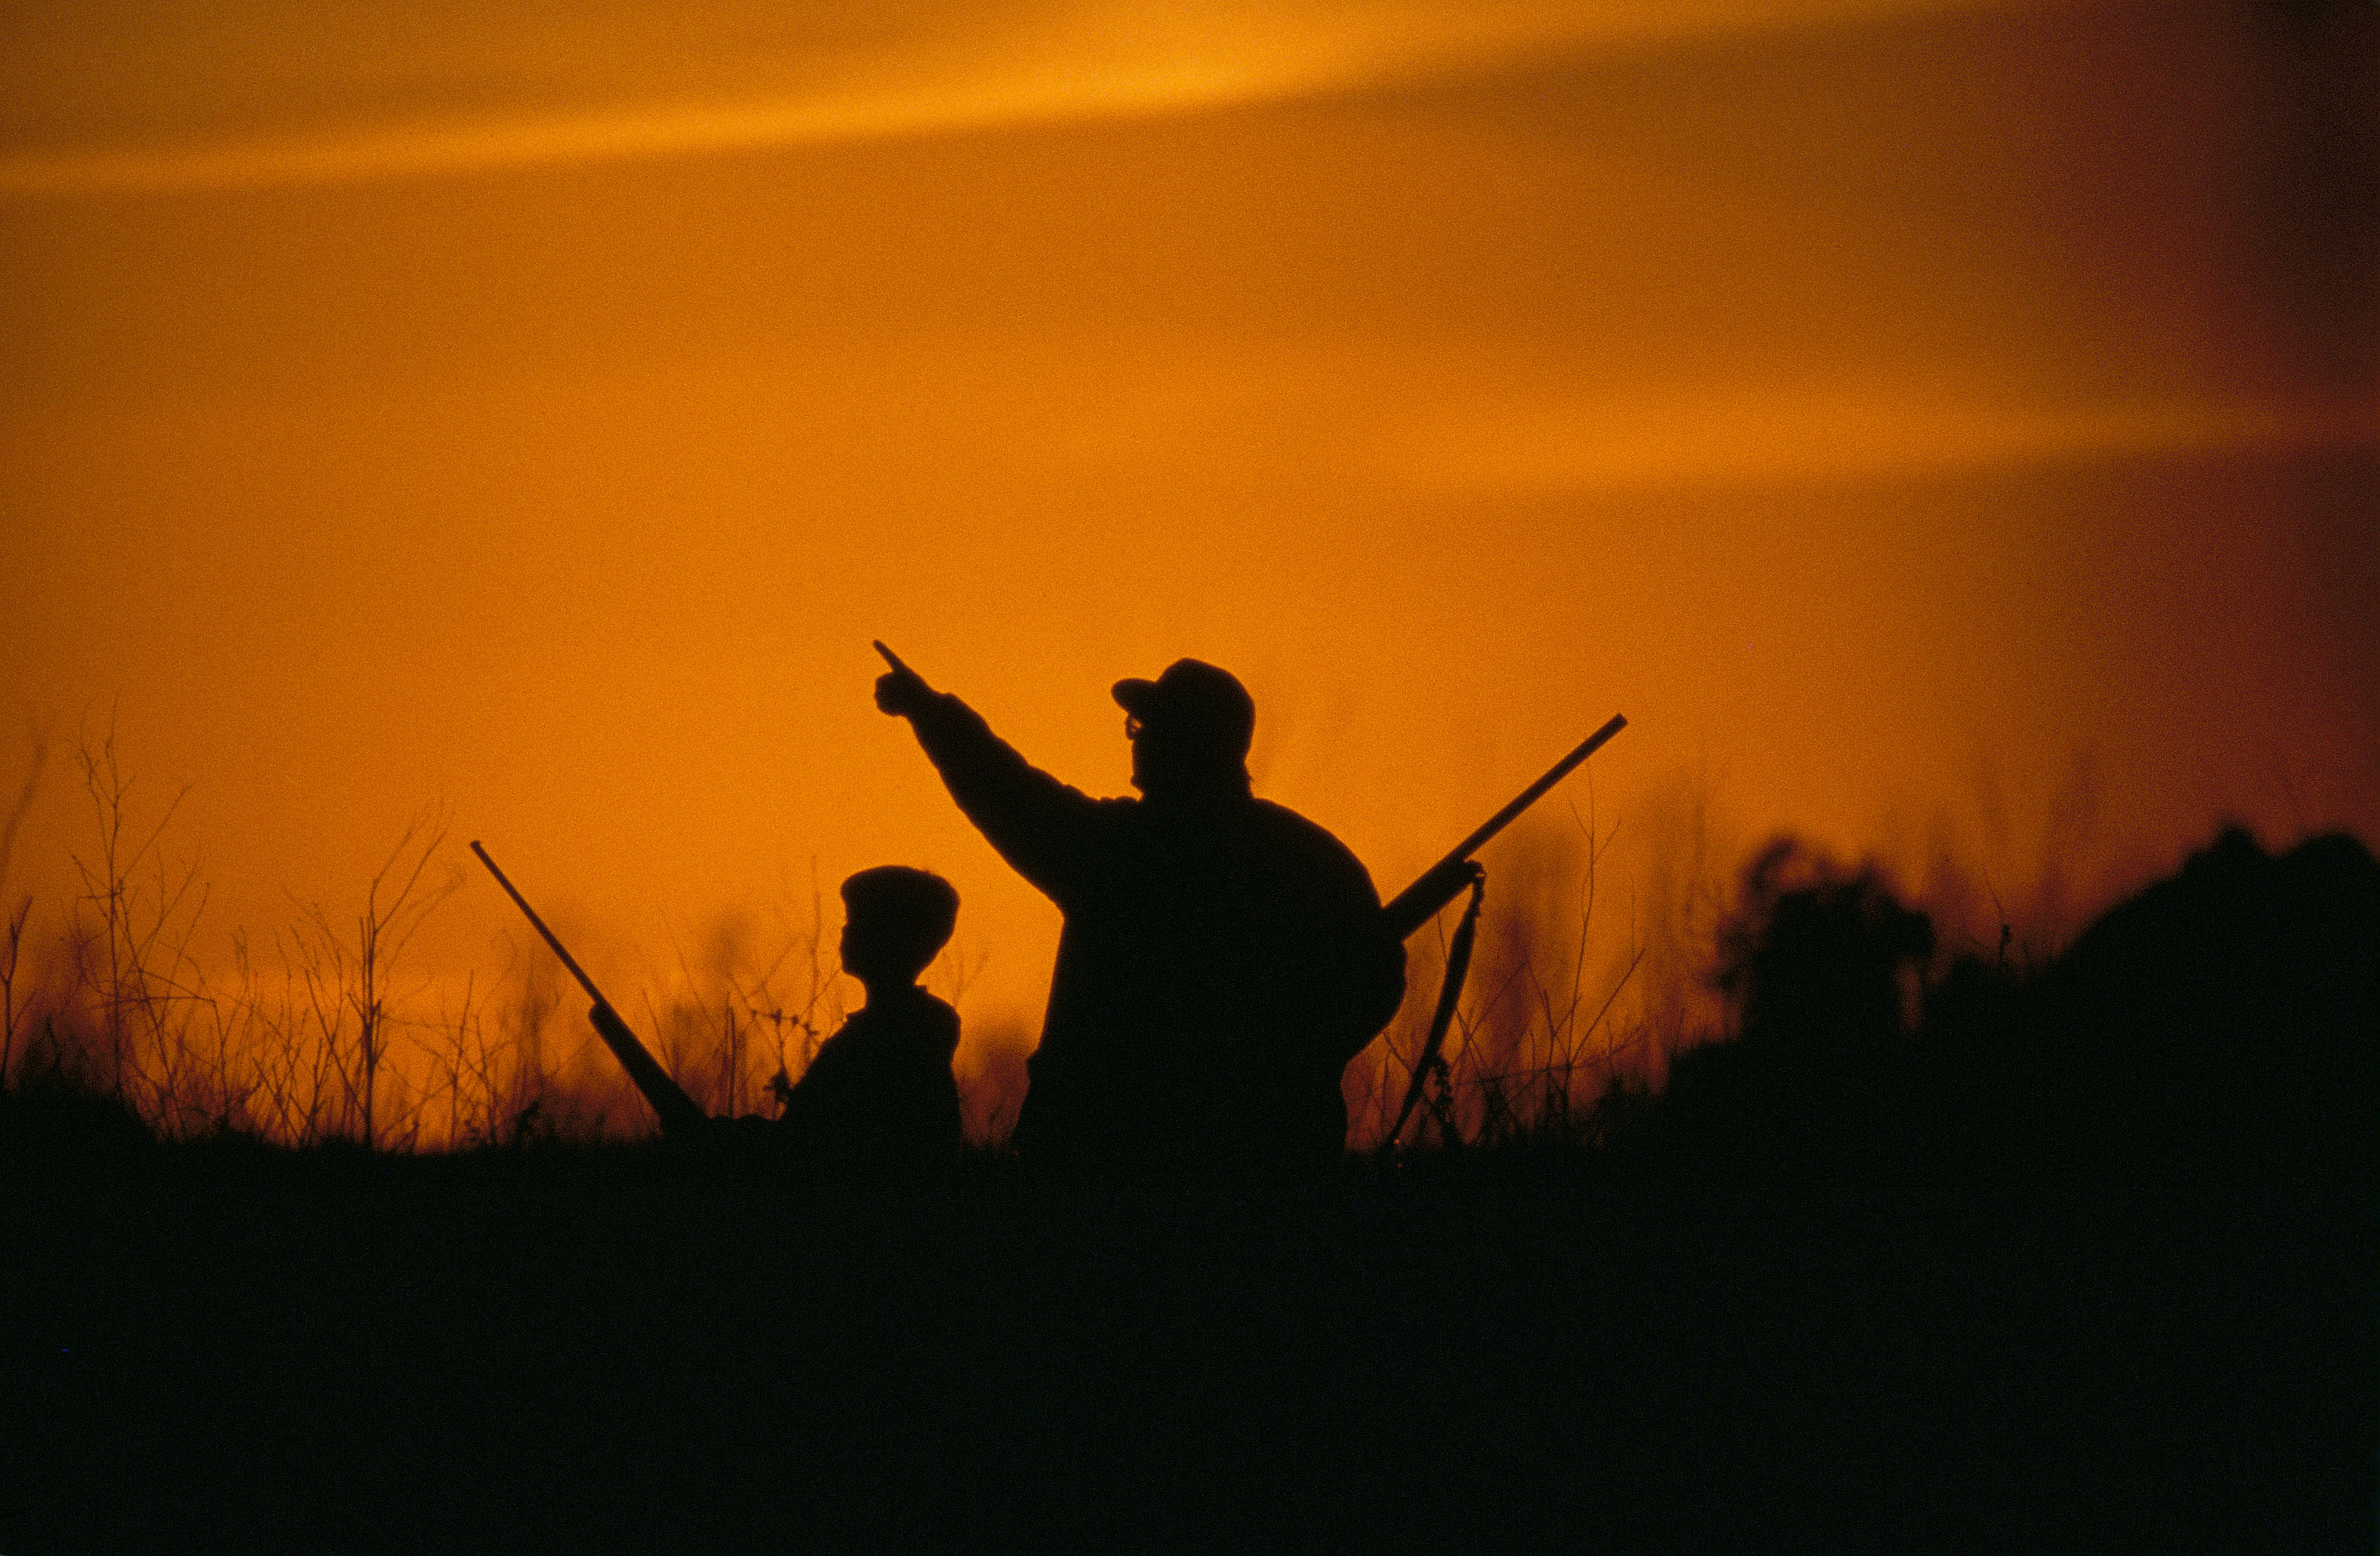 Image of two hunters against a sunset-colored sky. United States FIsh and Wildlife Service